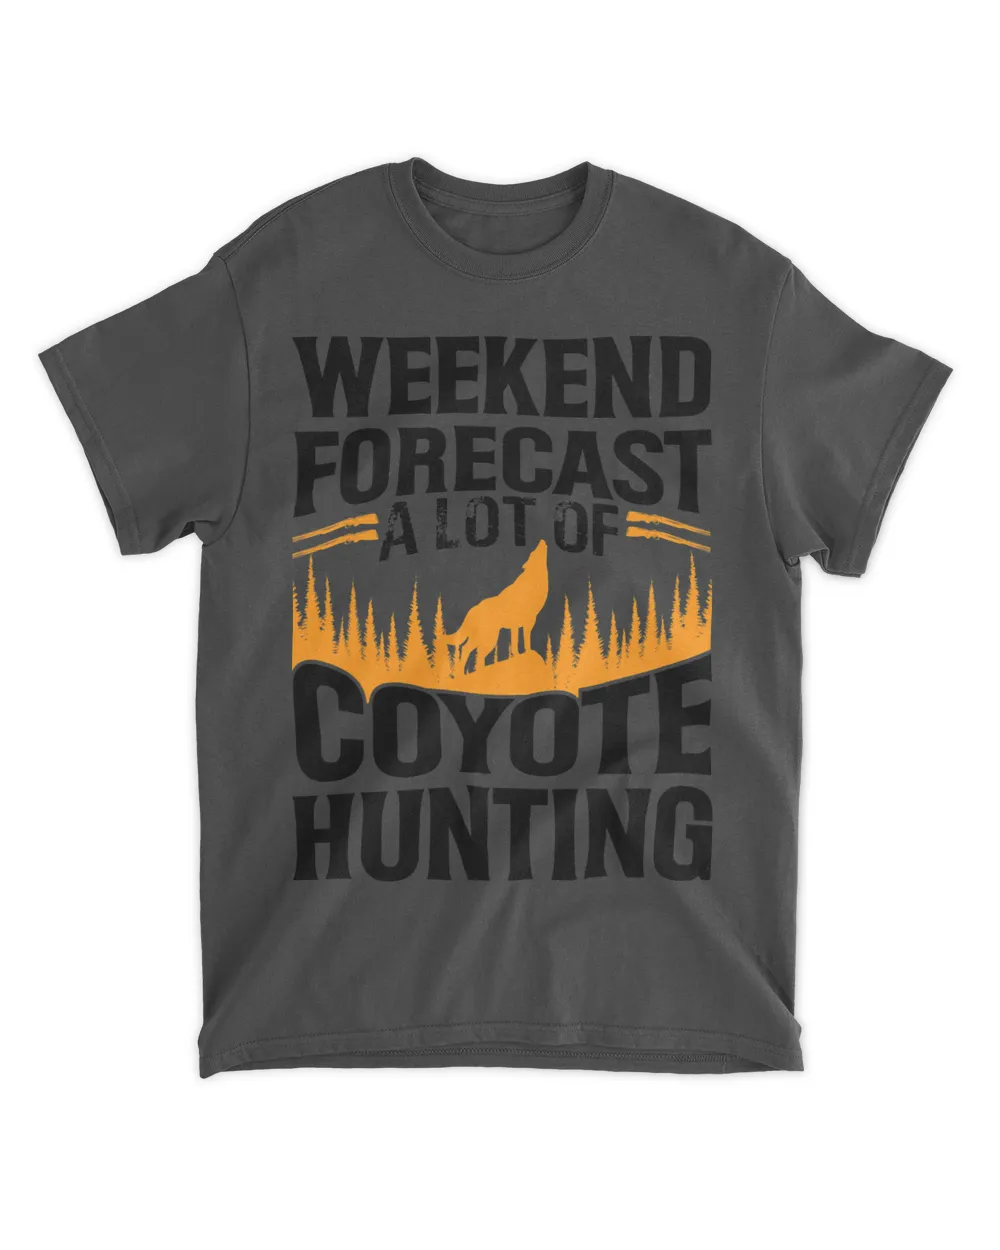 Weekend Forecast A Lot Of Coyote Hunting 2Funny Hunt Jokes 43